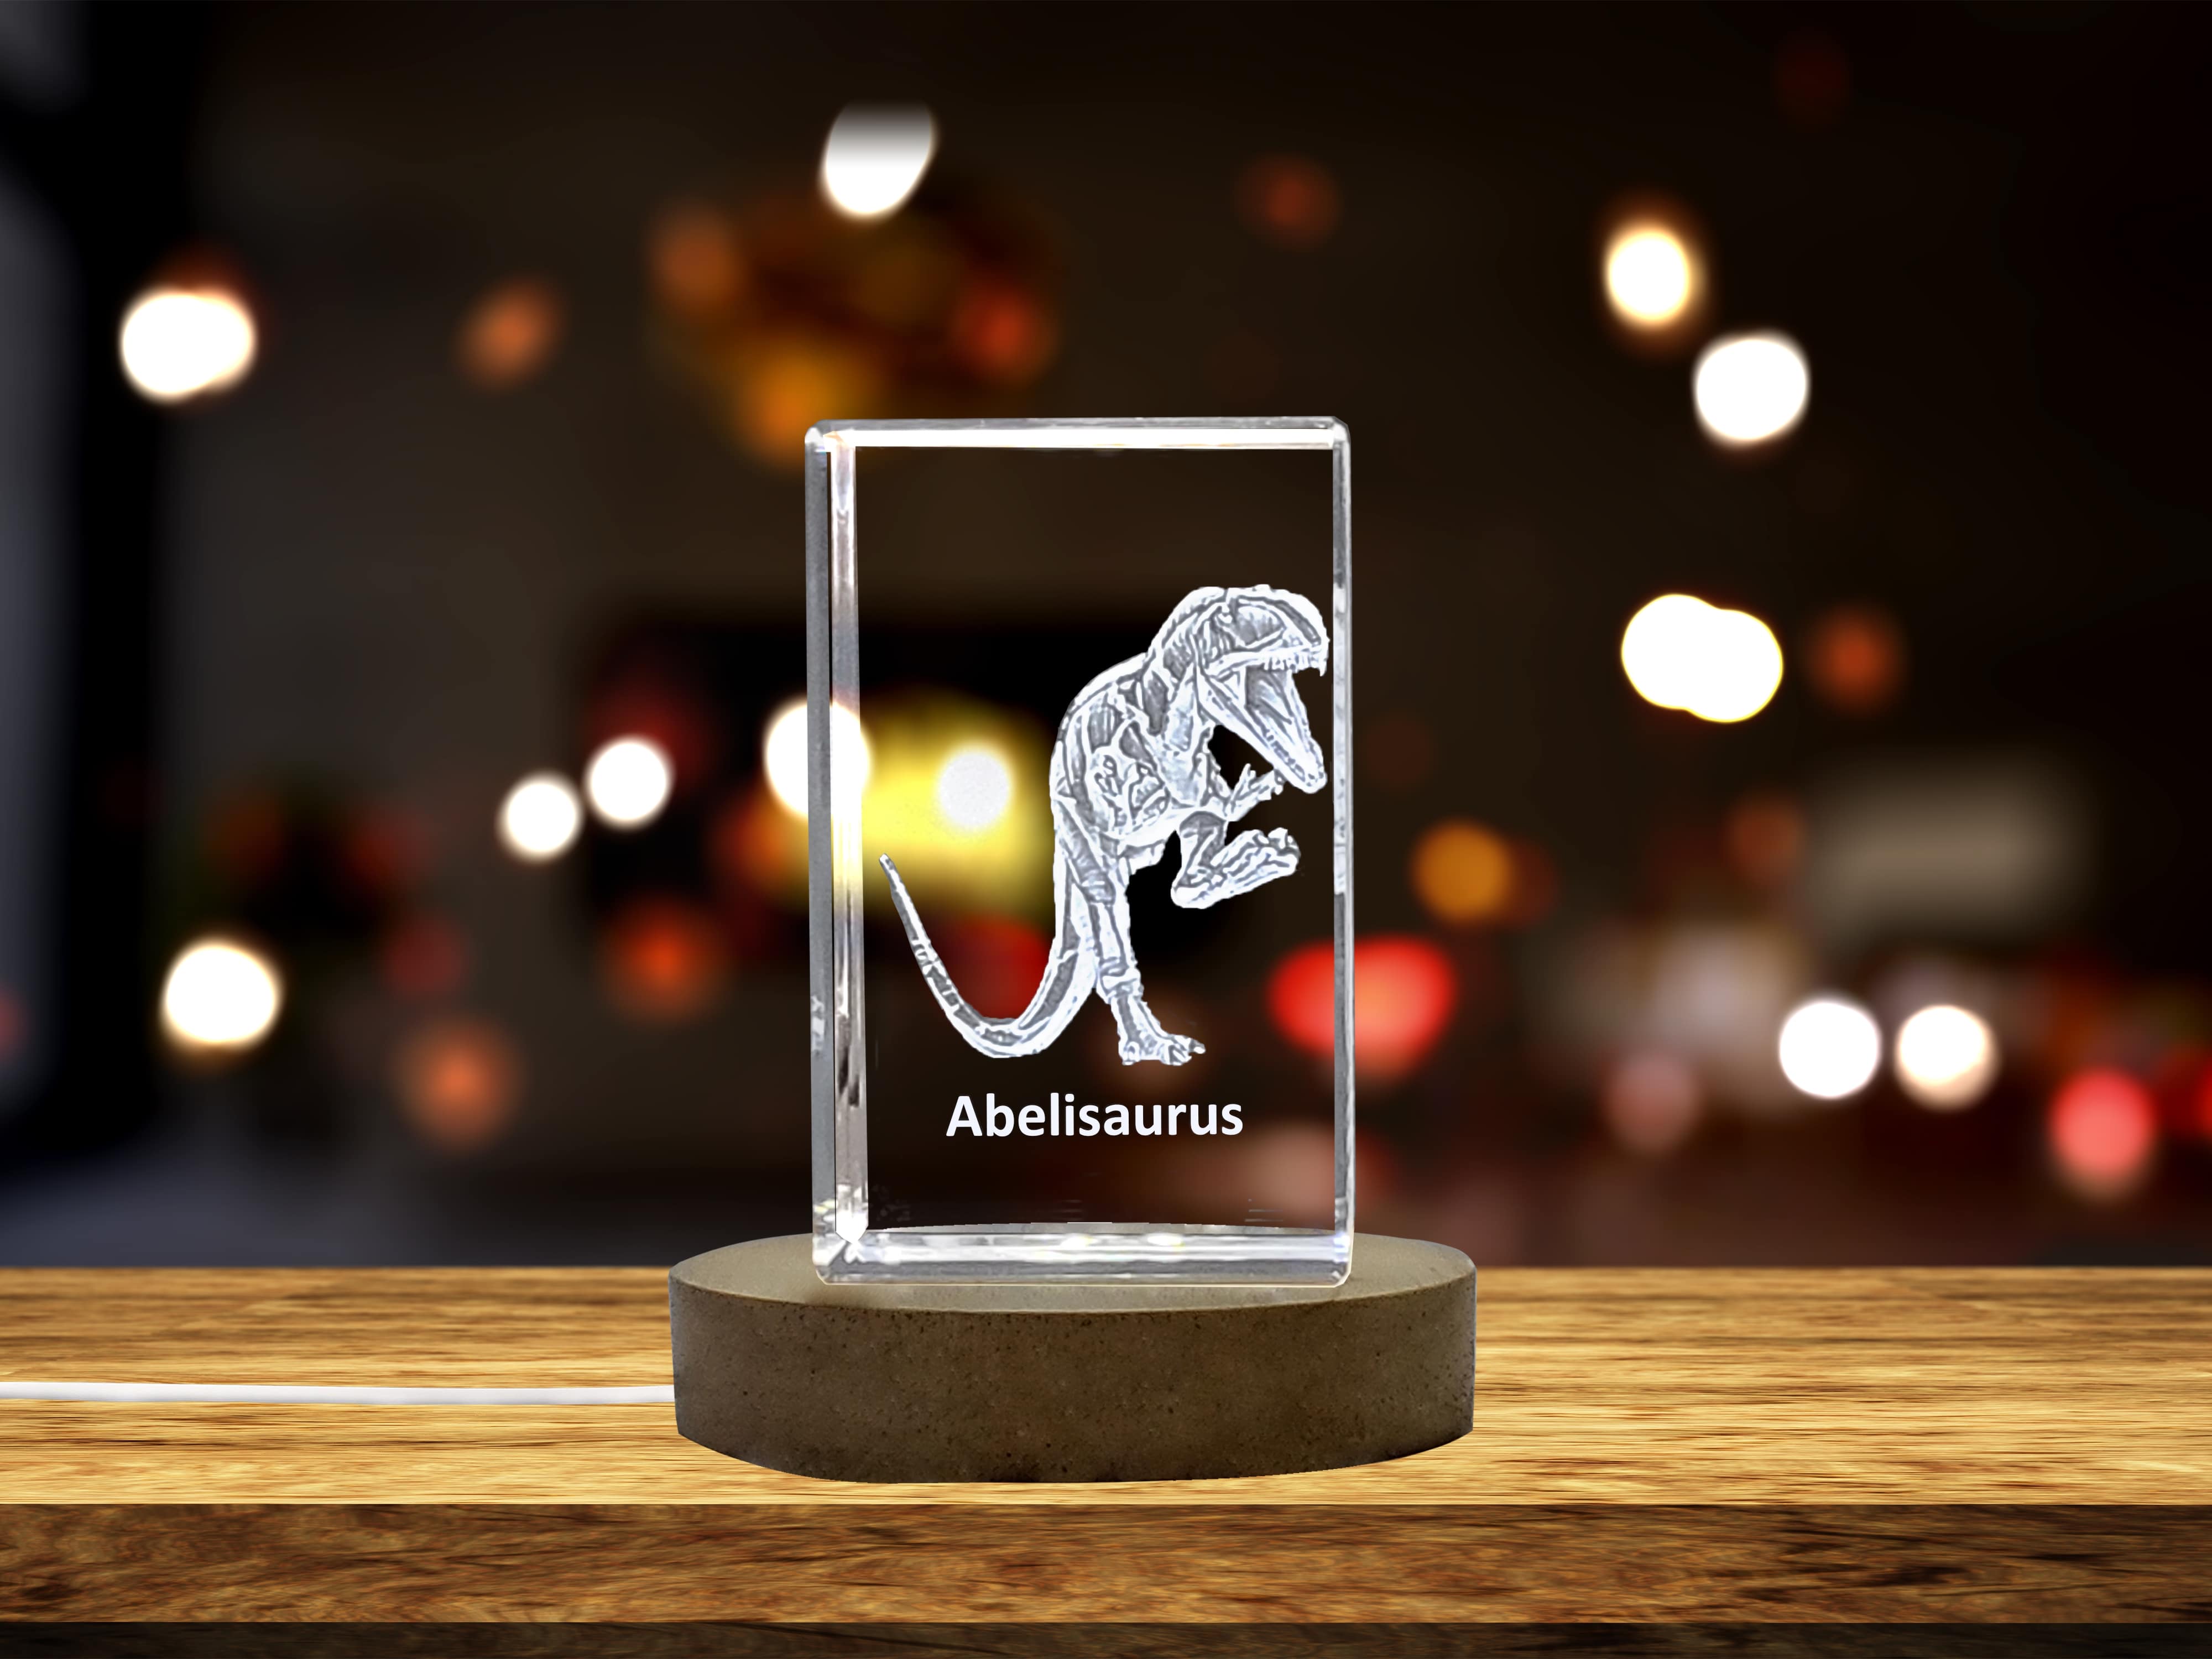 Abelisaurus Dinosaur 3D Engraved Crystal - Handcrafted Art Piece with LED Base Light - Available in Multiple Sizes A&B Crystal Collection